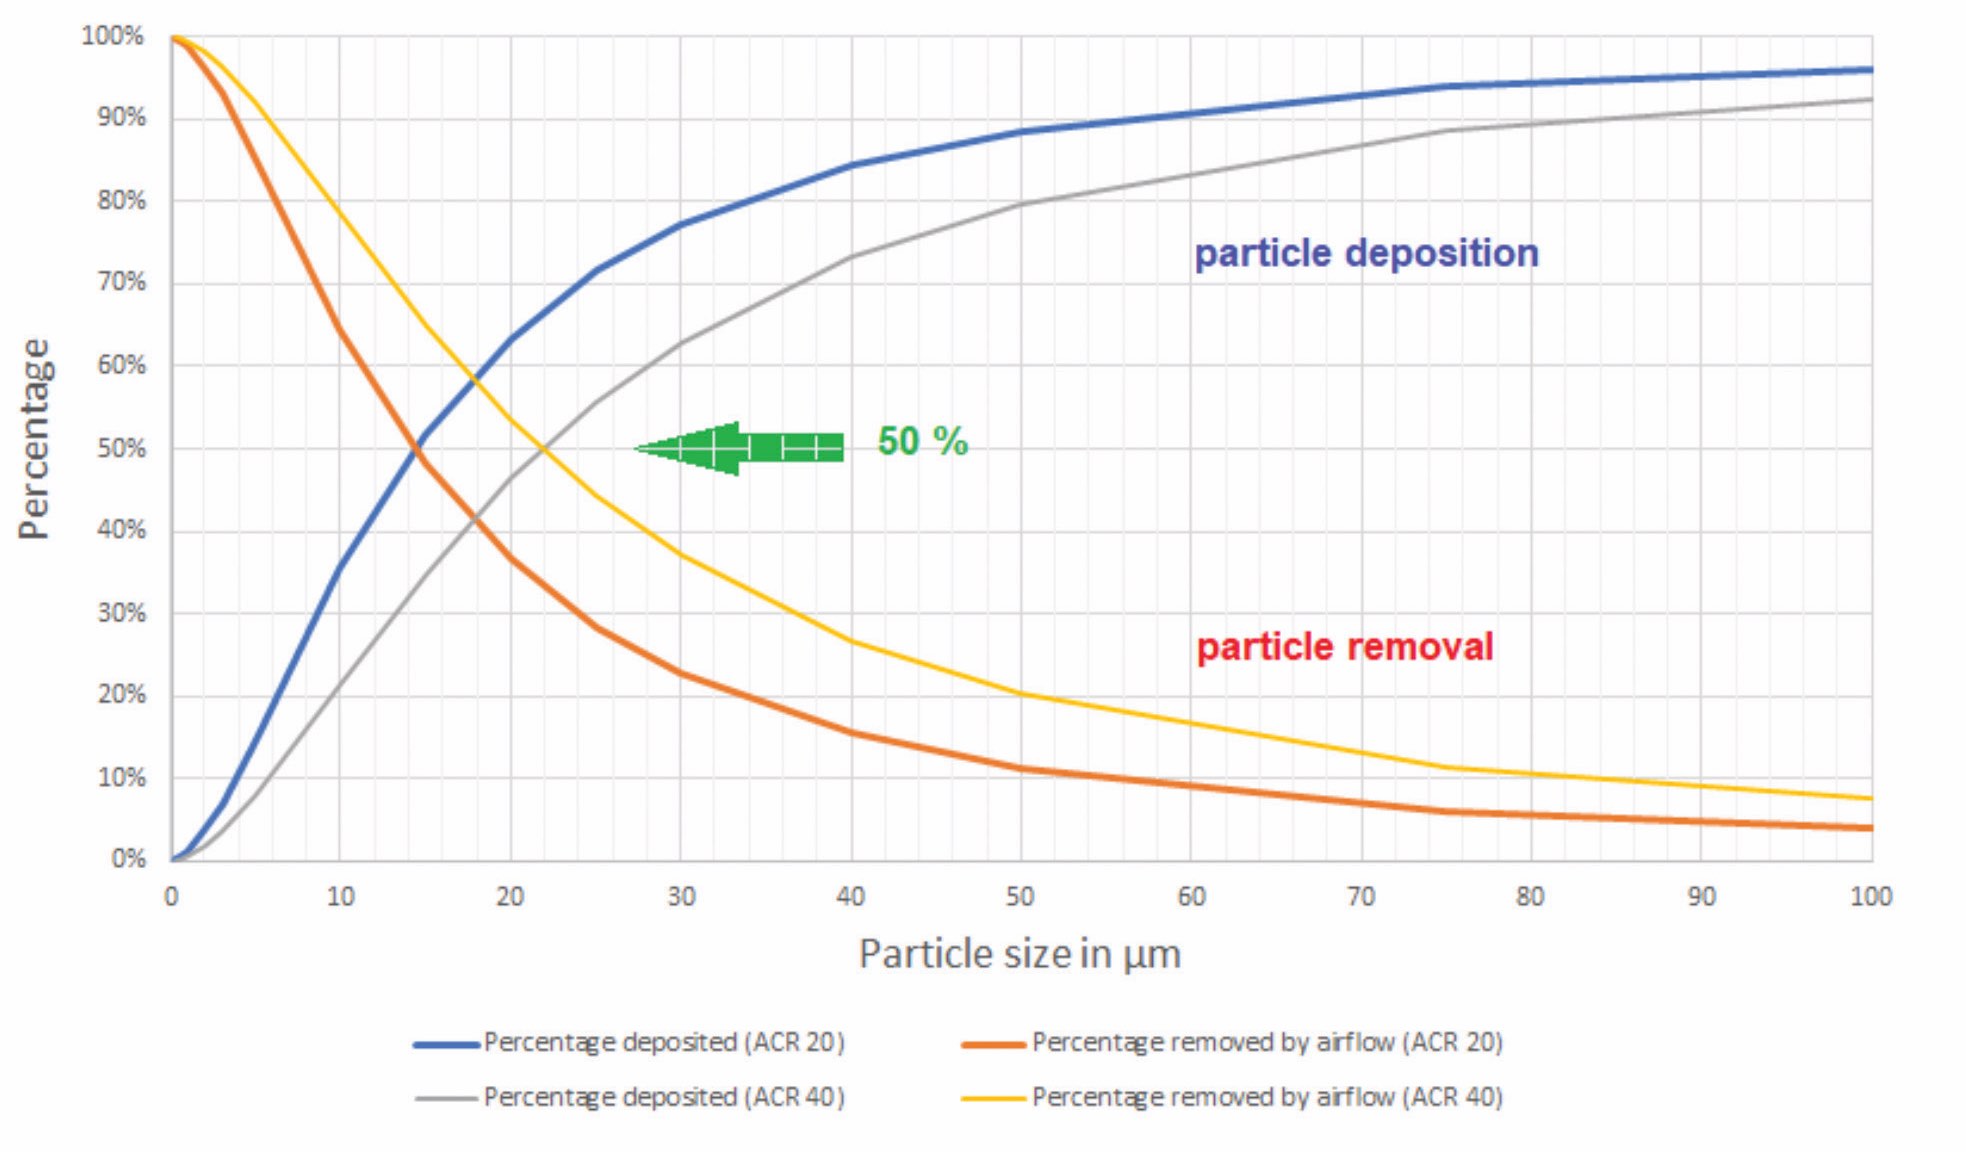 The percentage of particles removed by airflow and the resulting particle deposition